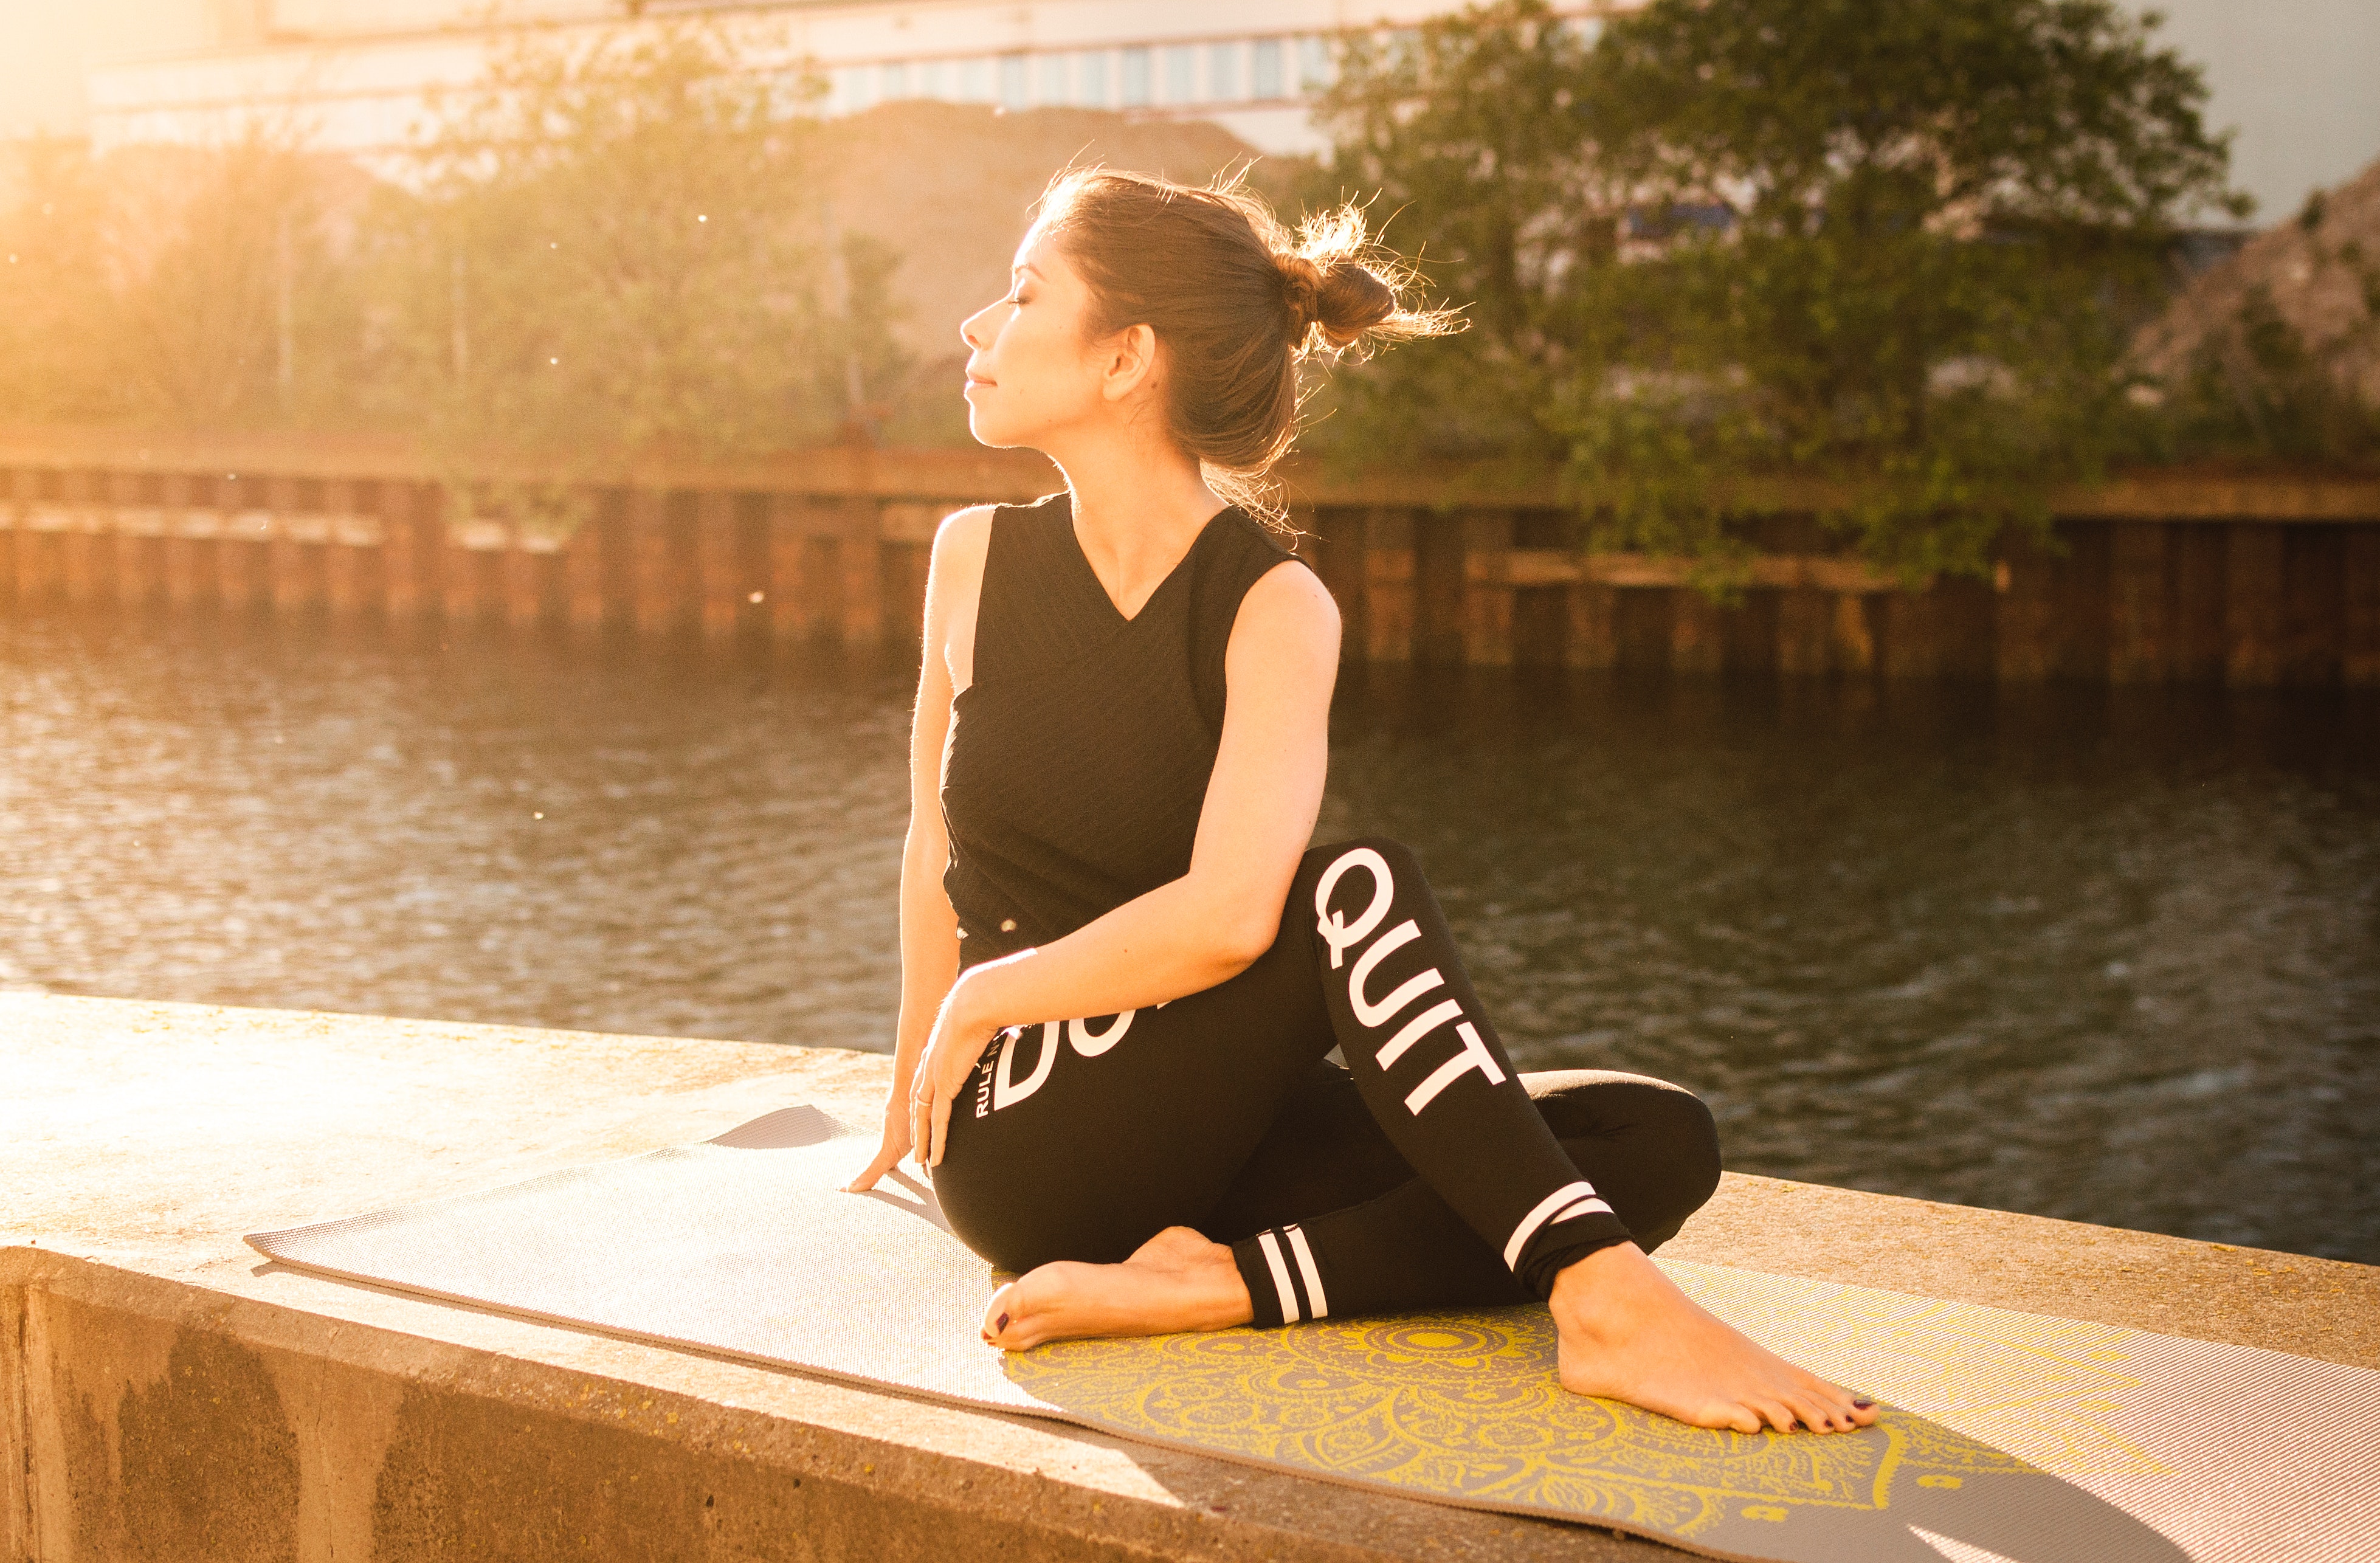 Woman wearing black fitness outfit performs yoga near body of water photo